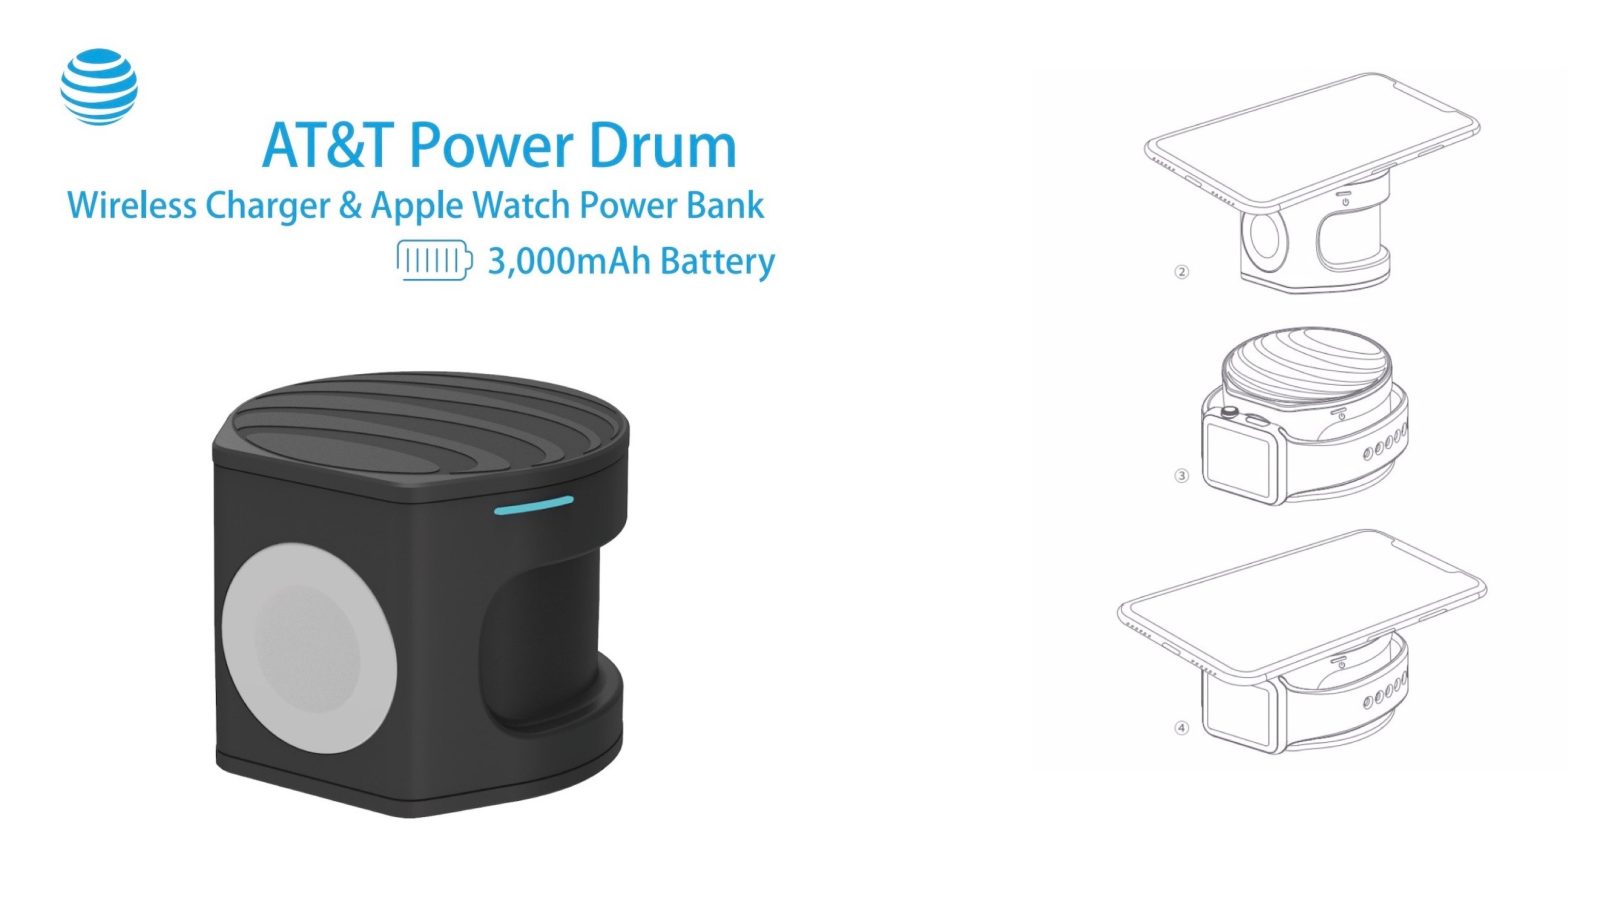 AT&T Power Drum